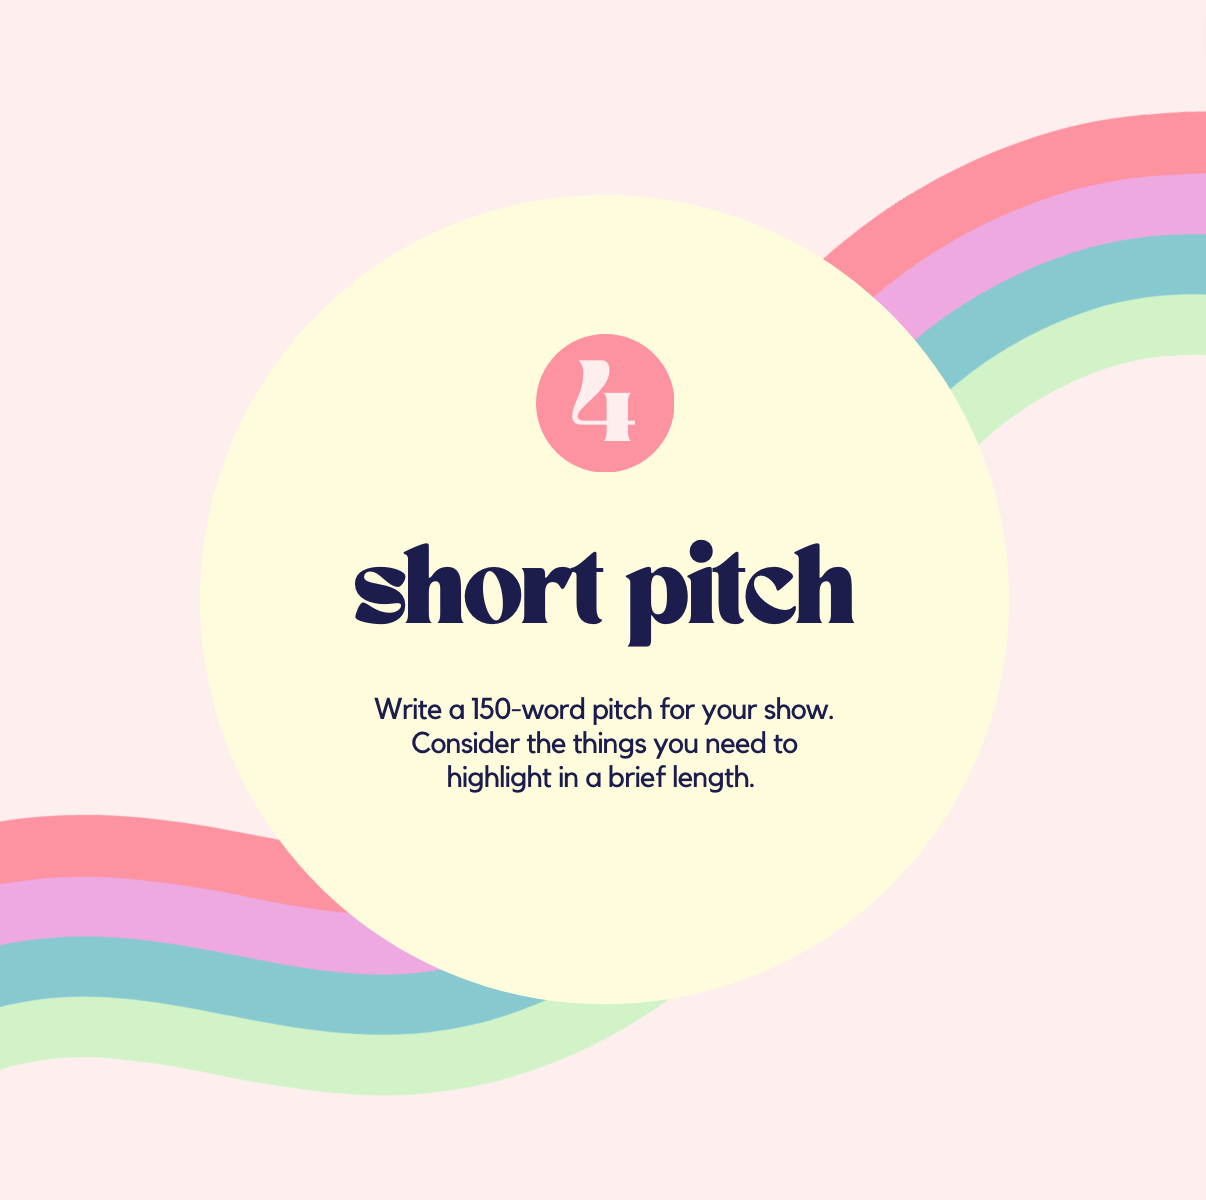 Week 4: Short Pitch. Write a 150-word pitch for your show. Consider the things you need to highlight in a brief length.